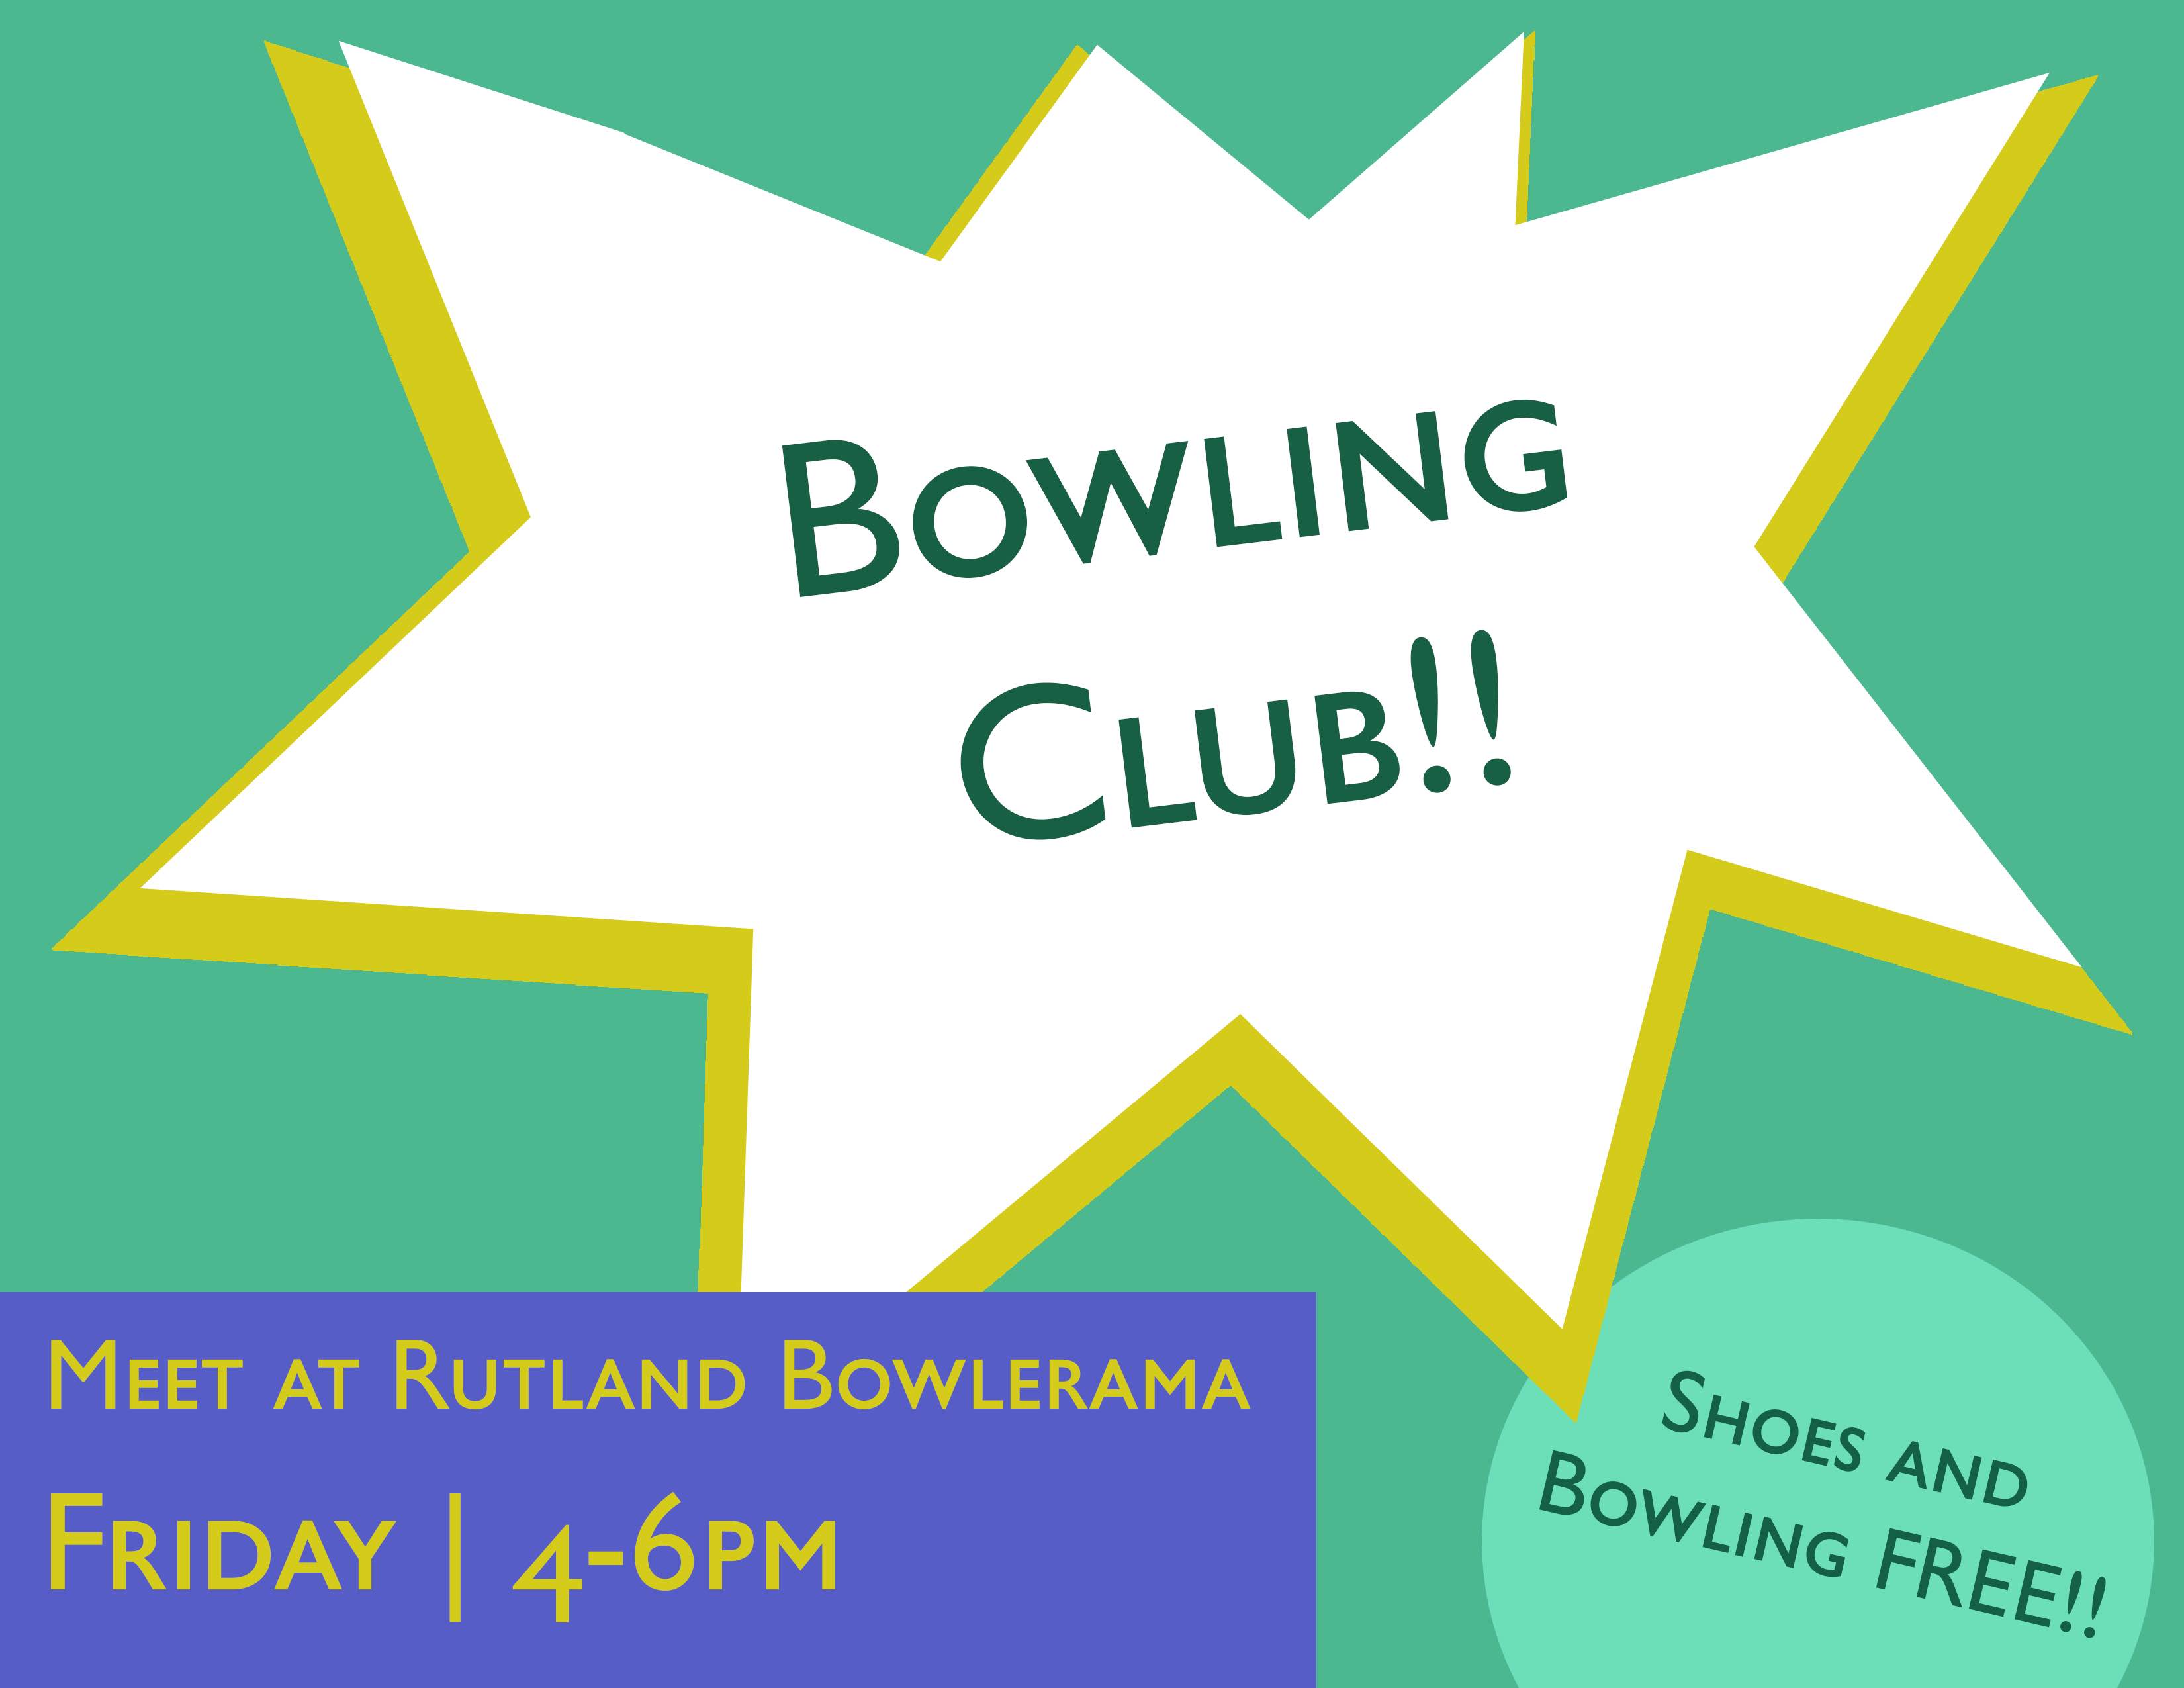 Friday, February 2nd will be the first day of Bowling Club!

 It will be at the Rutland Bowlerama from 4 pm-6 pm. 

The address for the bowling alley is 158 S Main St, Rutland, VT 05701.

Shoes and bowling will be free for those who participate! 

Inexperienced? Not a problem- lessons will be available!